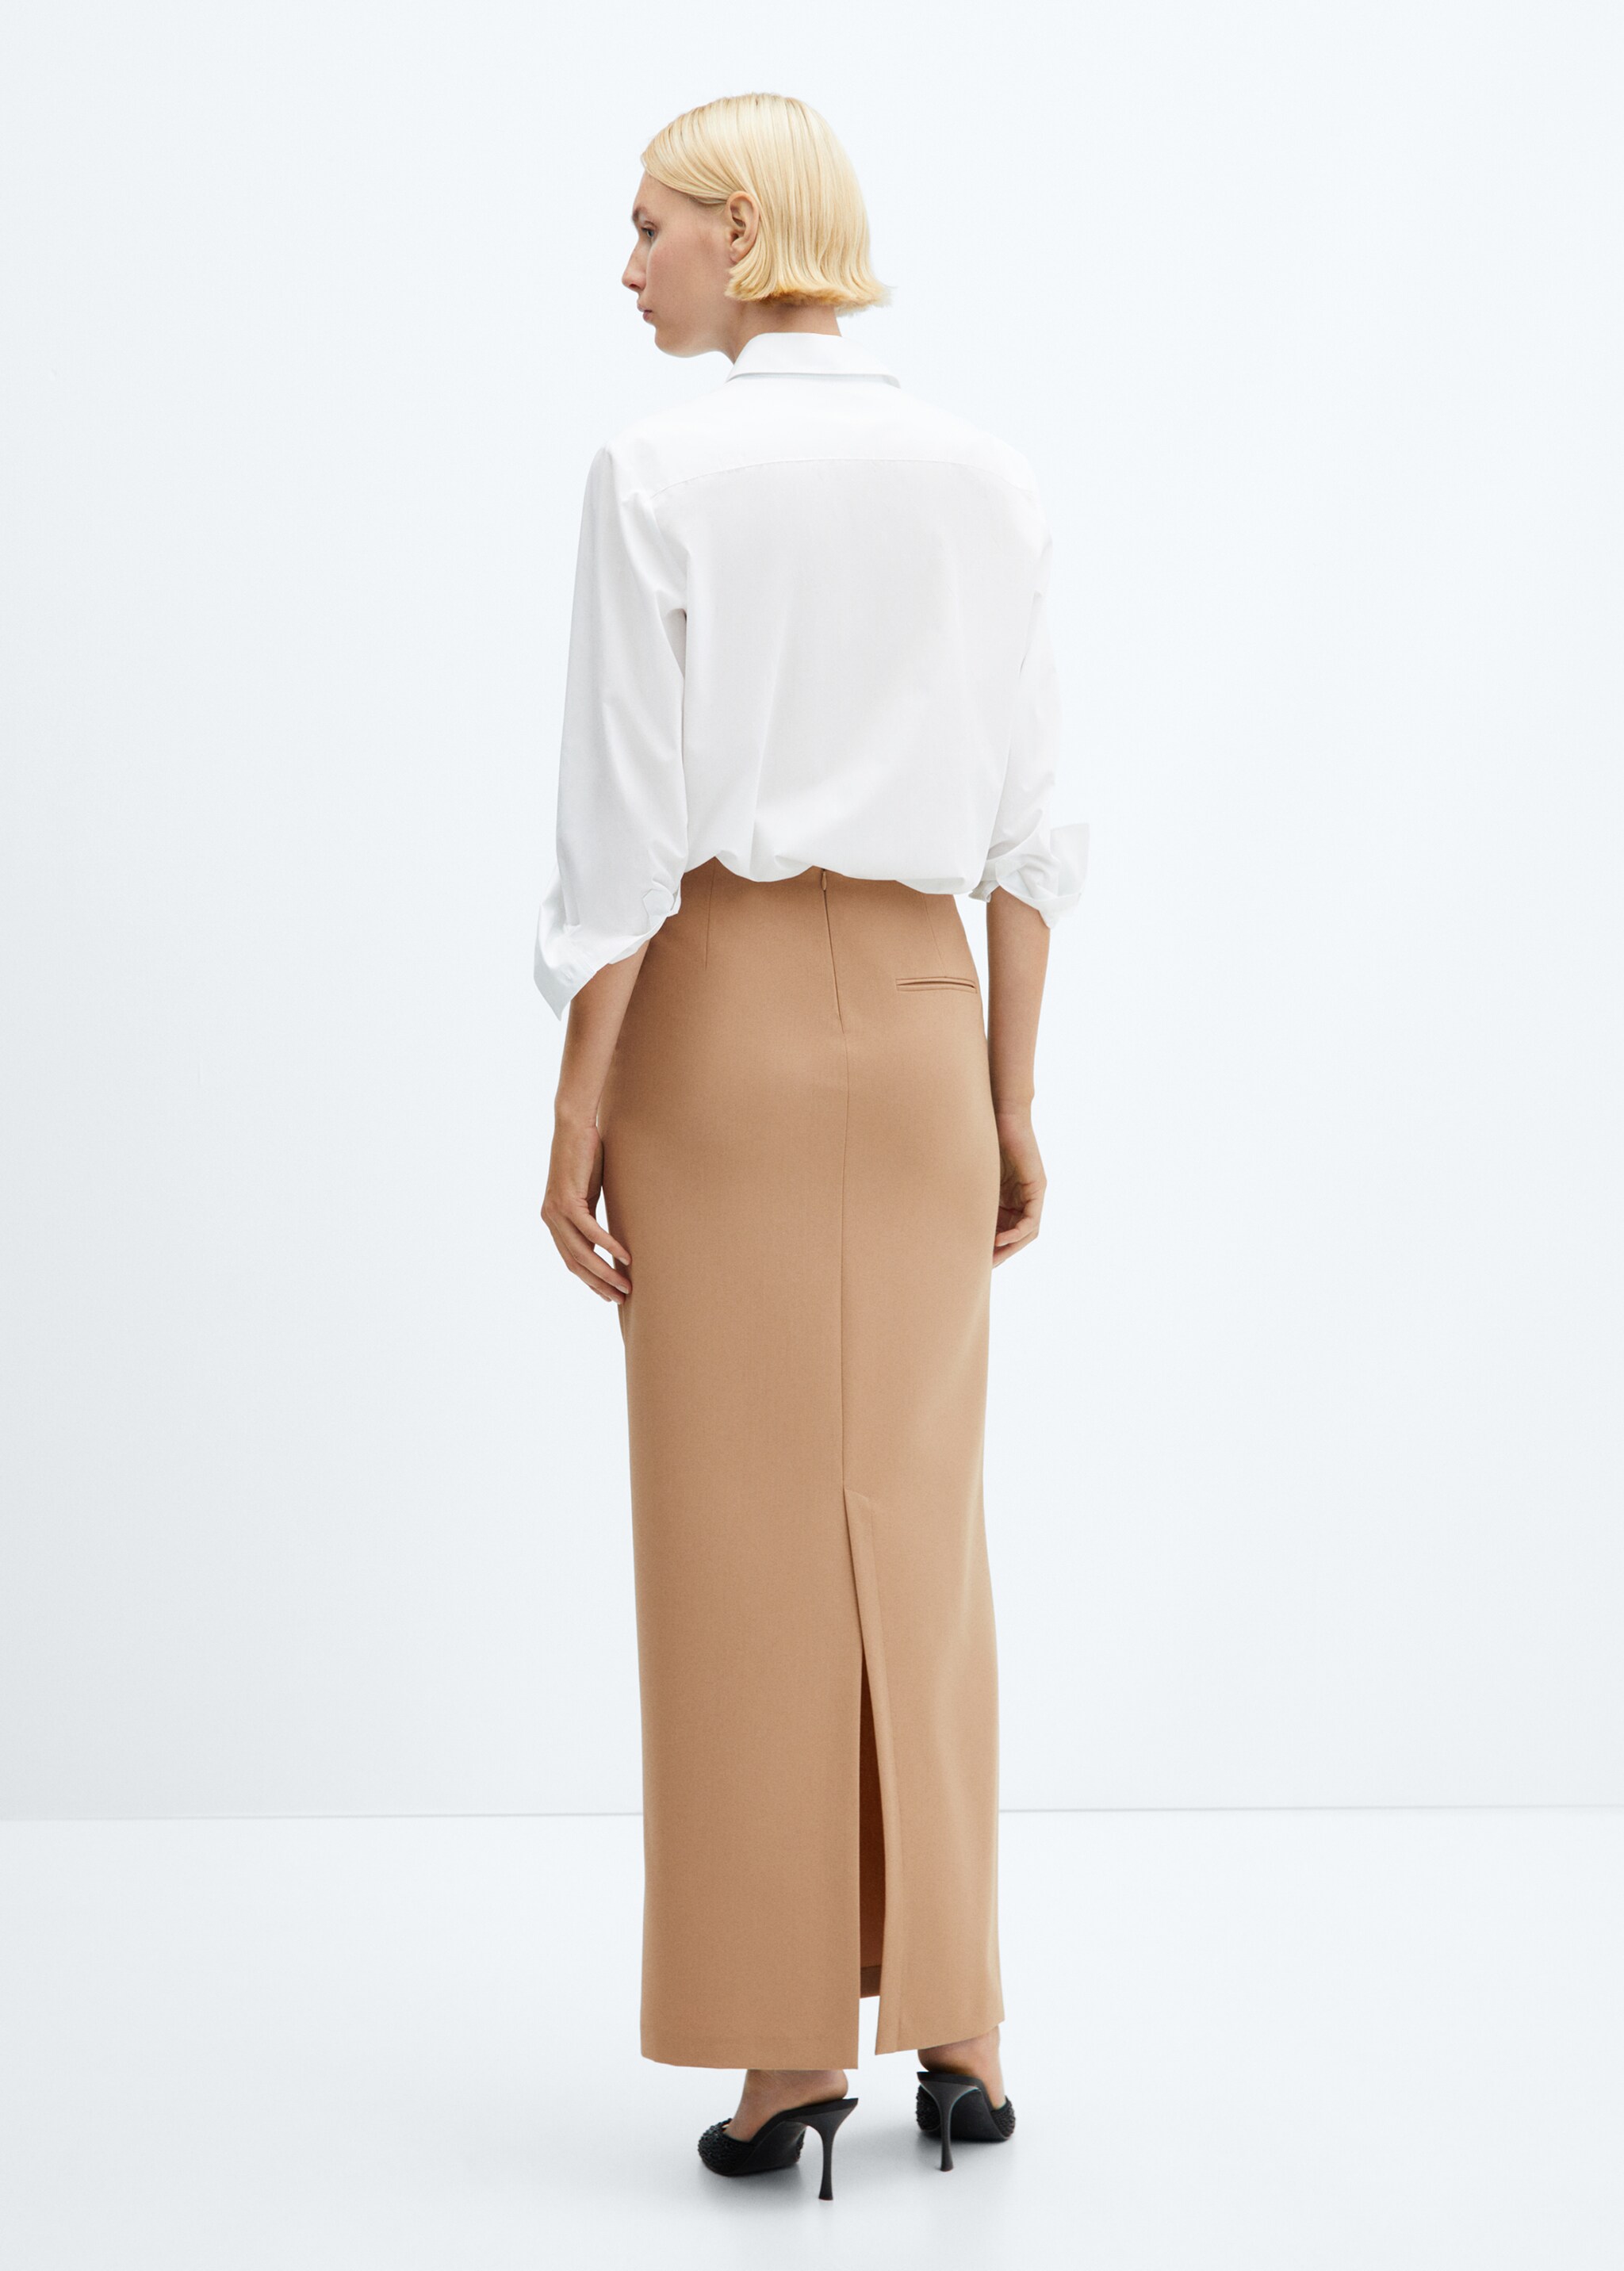 Straight long skirt - Reverse of the article